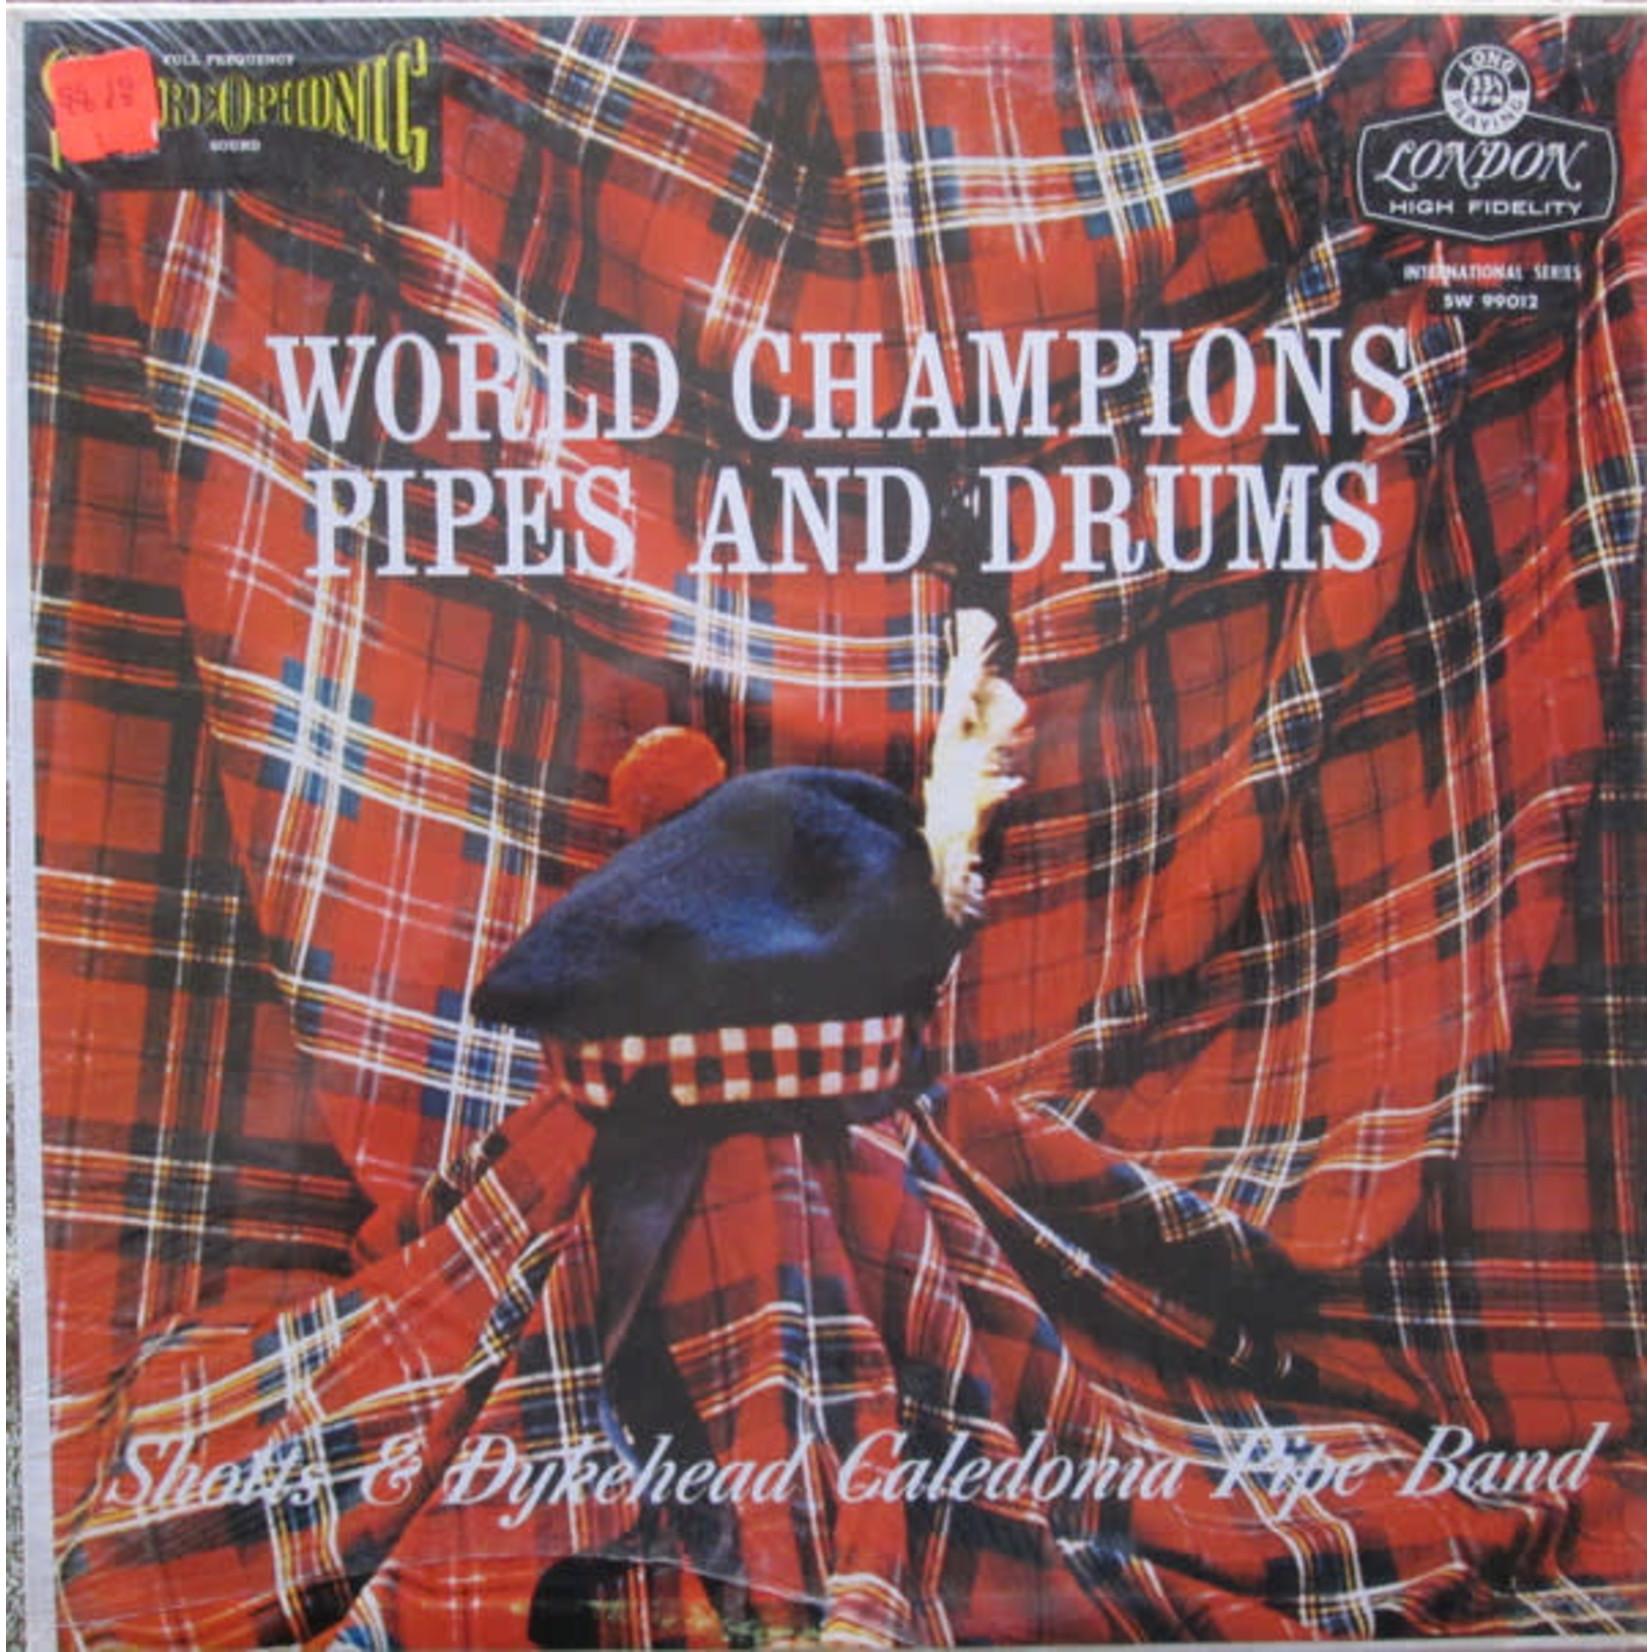 Shotts & Dykehead Caledonia Pipe Band ‎– World Champions Pipes And Drums (LP, SW 99012, VG)